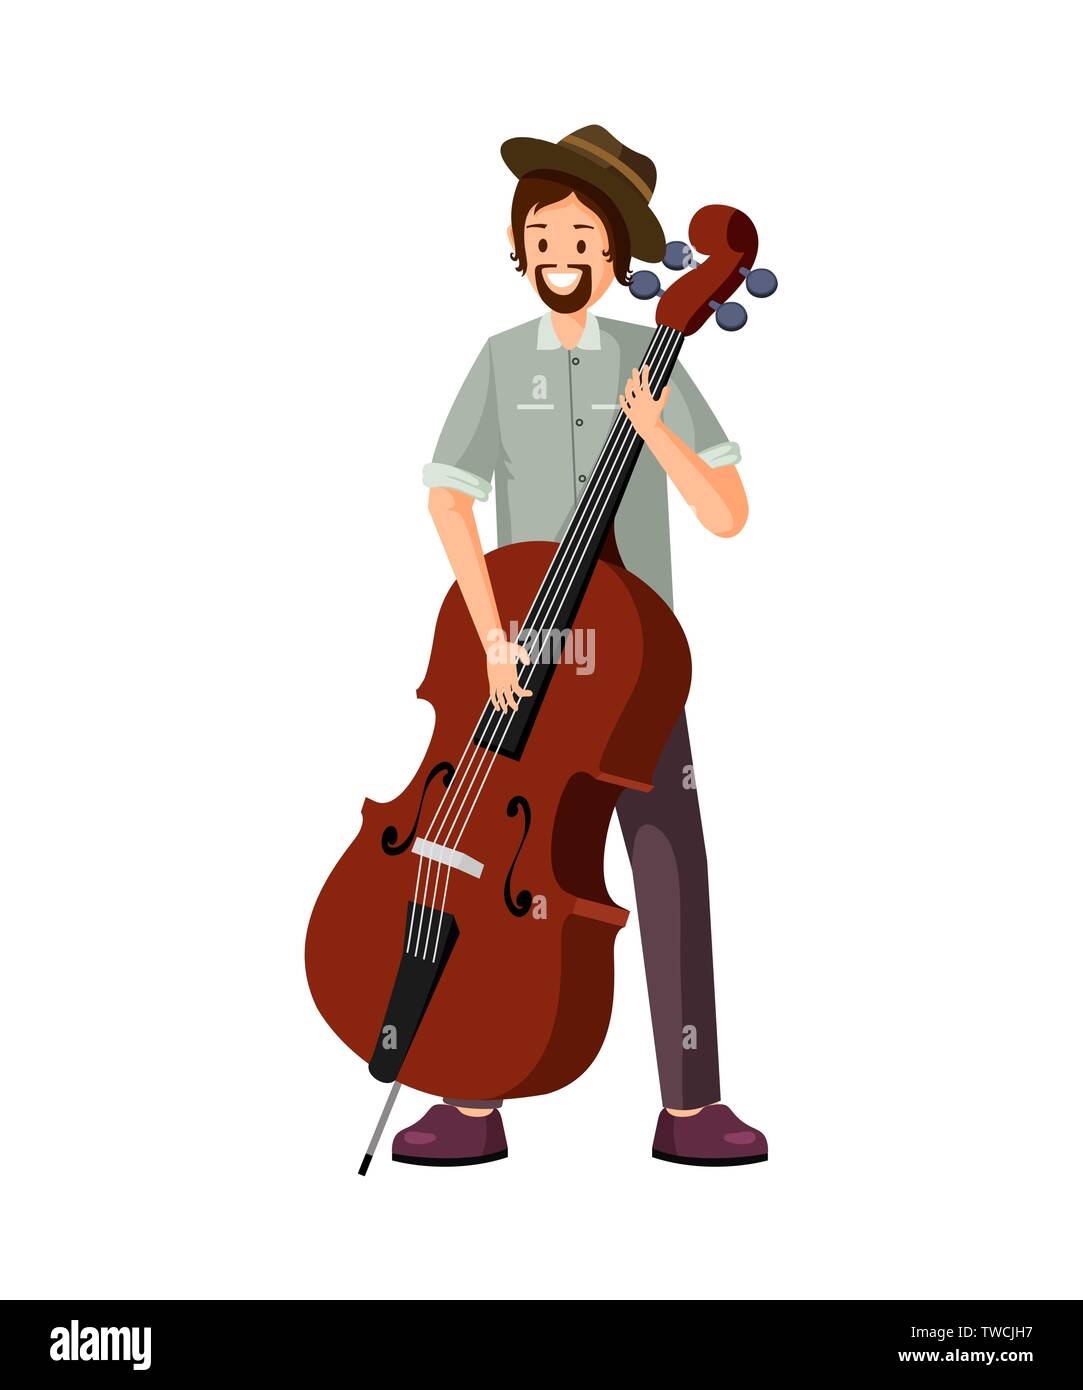 Male cello player flat vector illustration. Cheerful cellist, street musician playing acoustic musical instrument. Professional jazz performer holding contrabass, double bass with fingers on strings Stock Vector